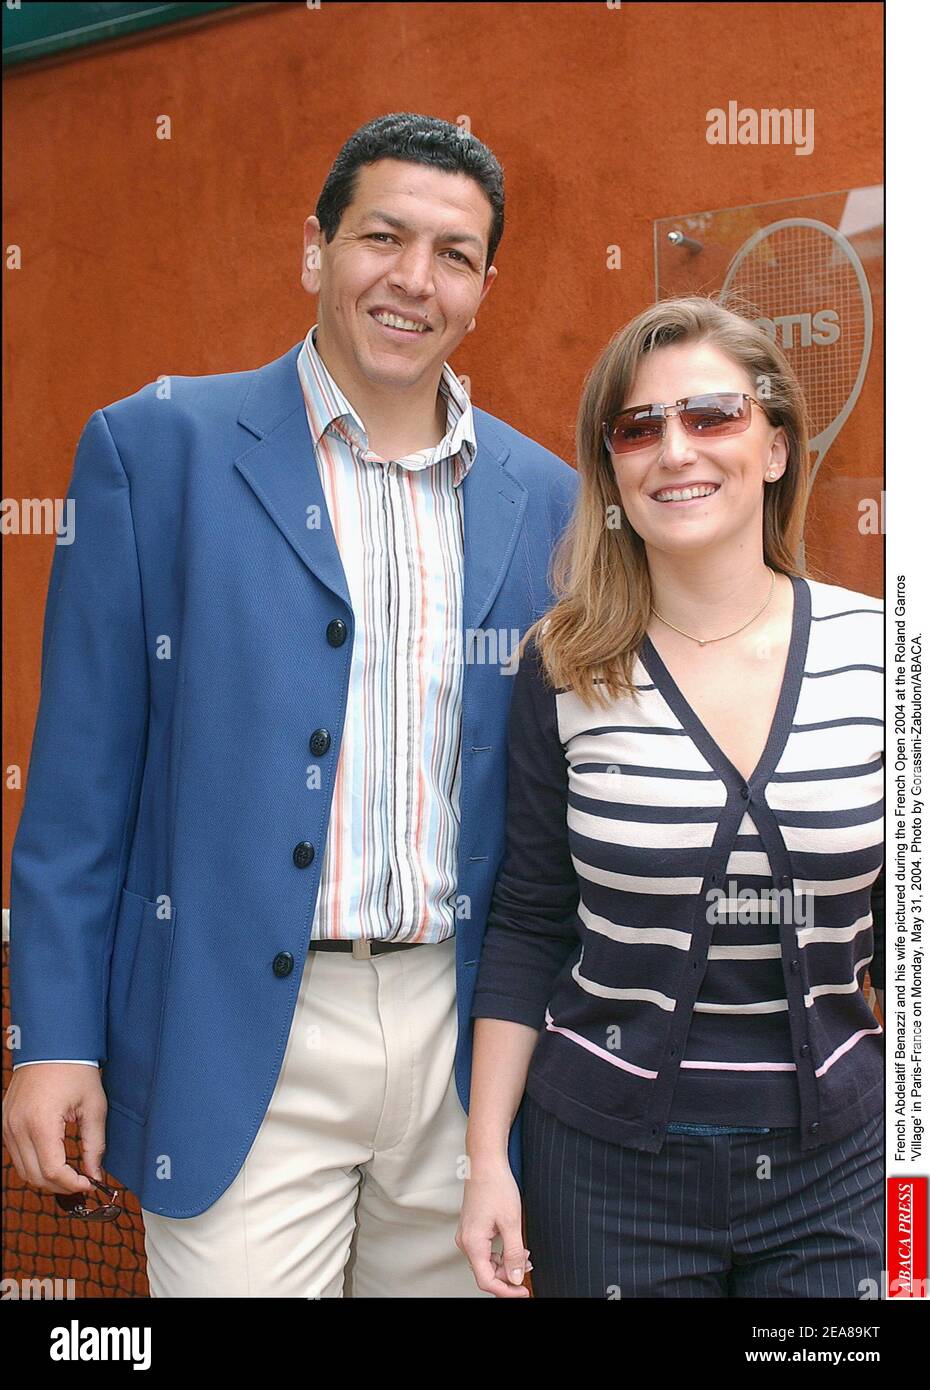 French Abdelatif Benazzi and his wife pictured during the French Open 2004 at the Roland Garros 'Village' in Paris-France on Monday, May 31, 2004. Photo by Gorassini-Zabulon/ABACA. Stock Photo